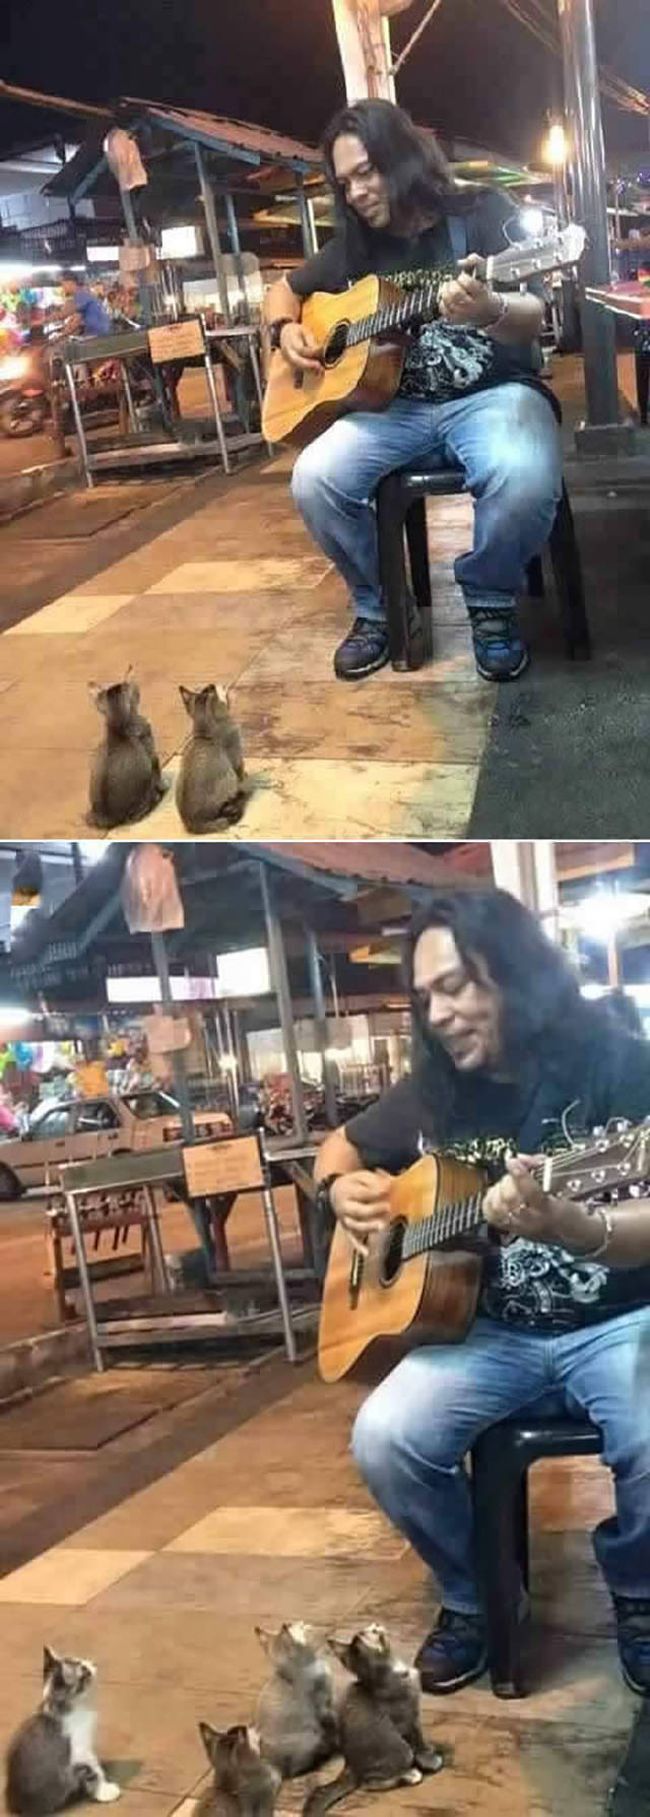 guitar player attracts some kittens to listen in to his tunes